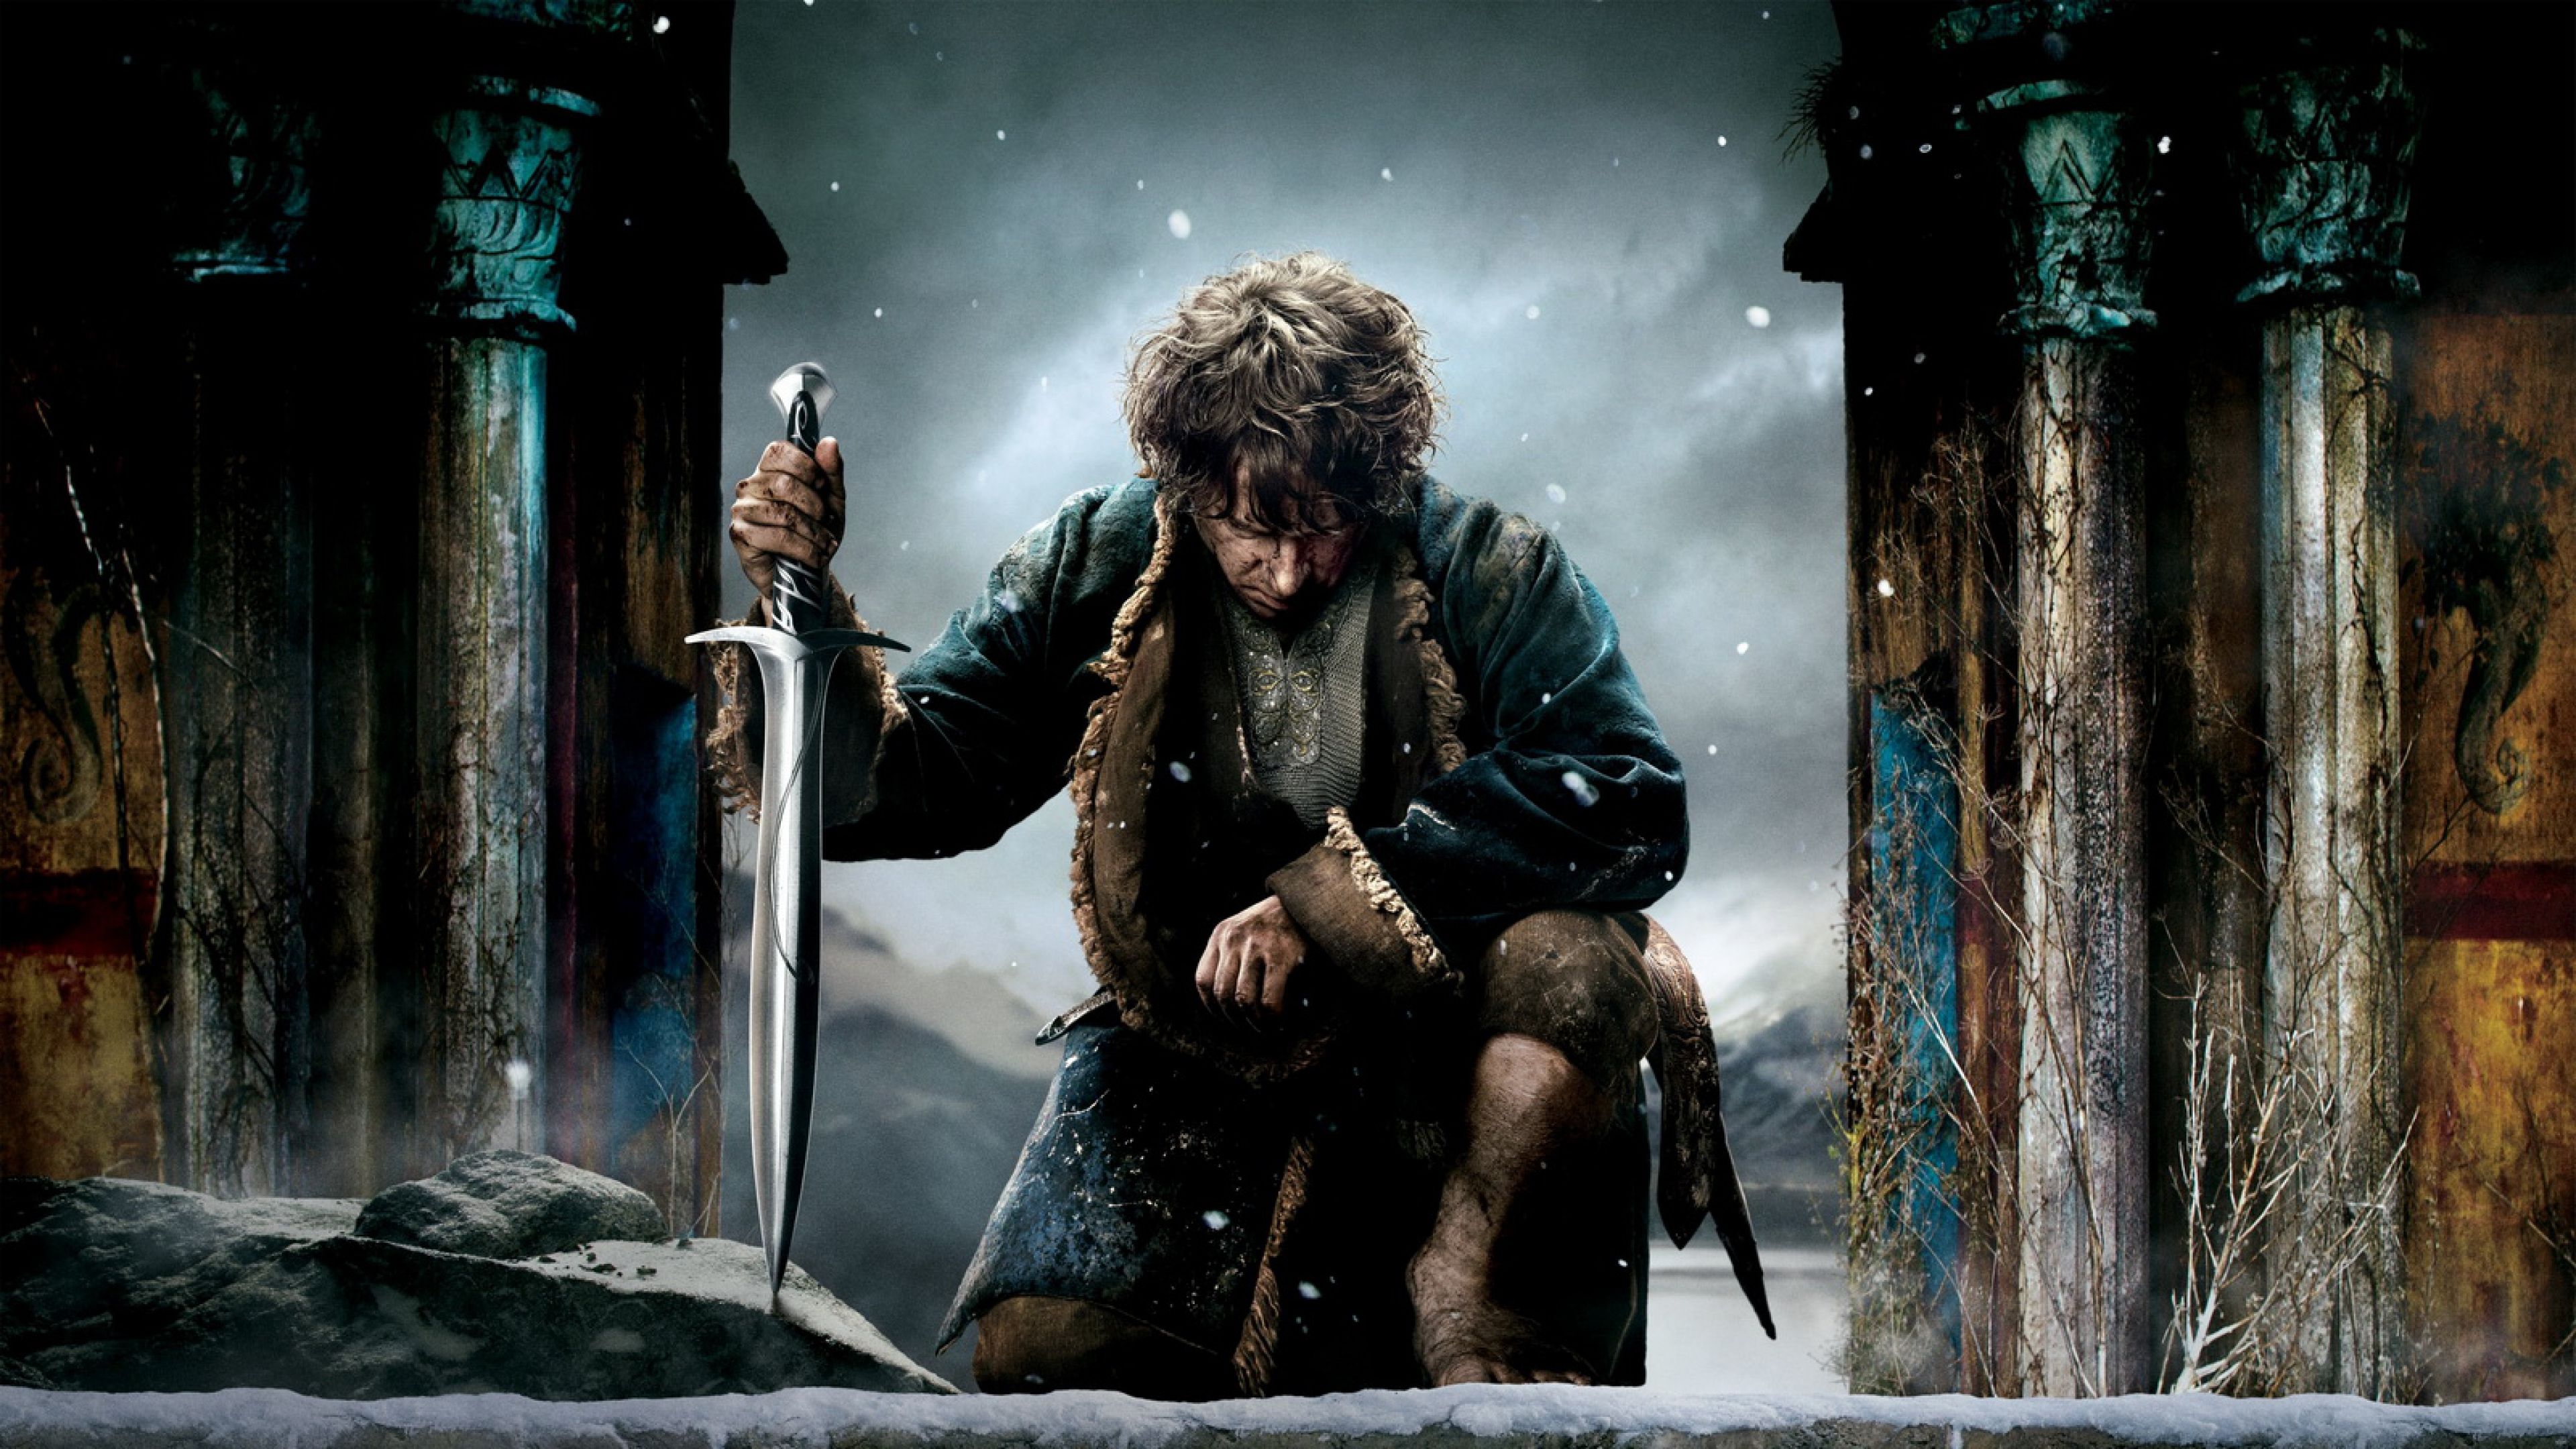 Download Wallpaper 3840x2160 The hobbit the battle of the five